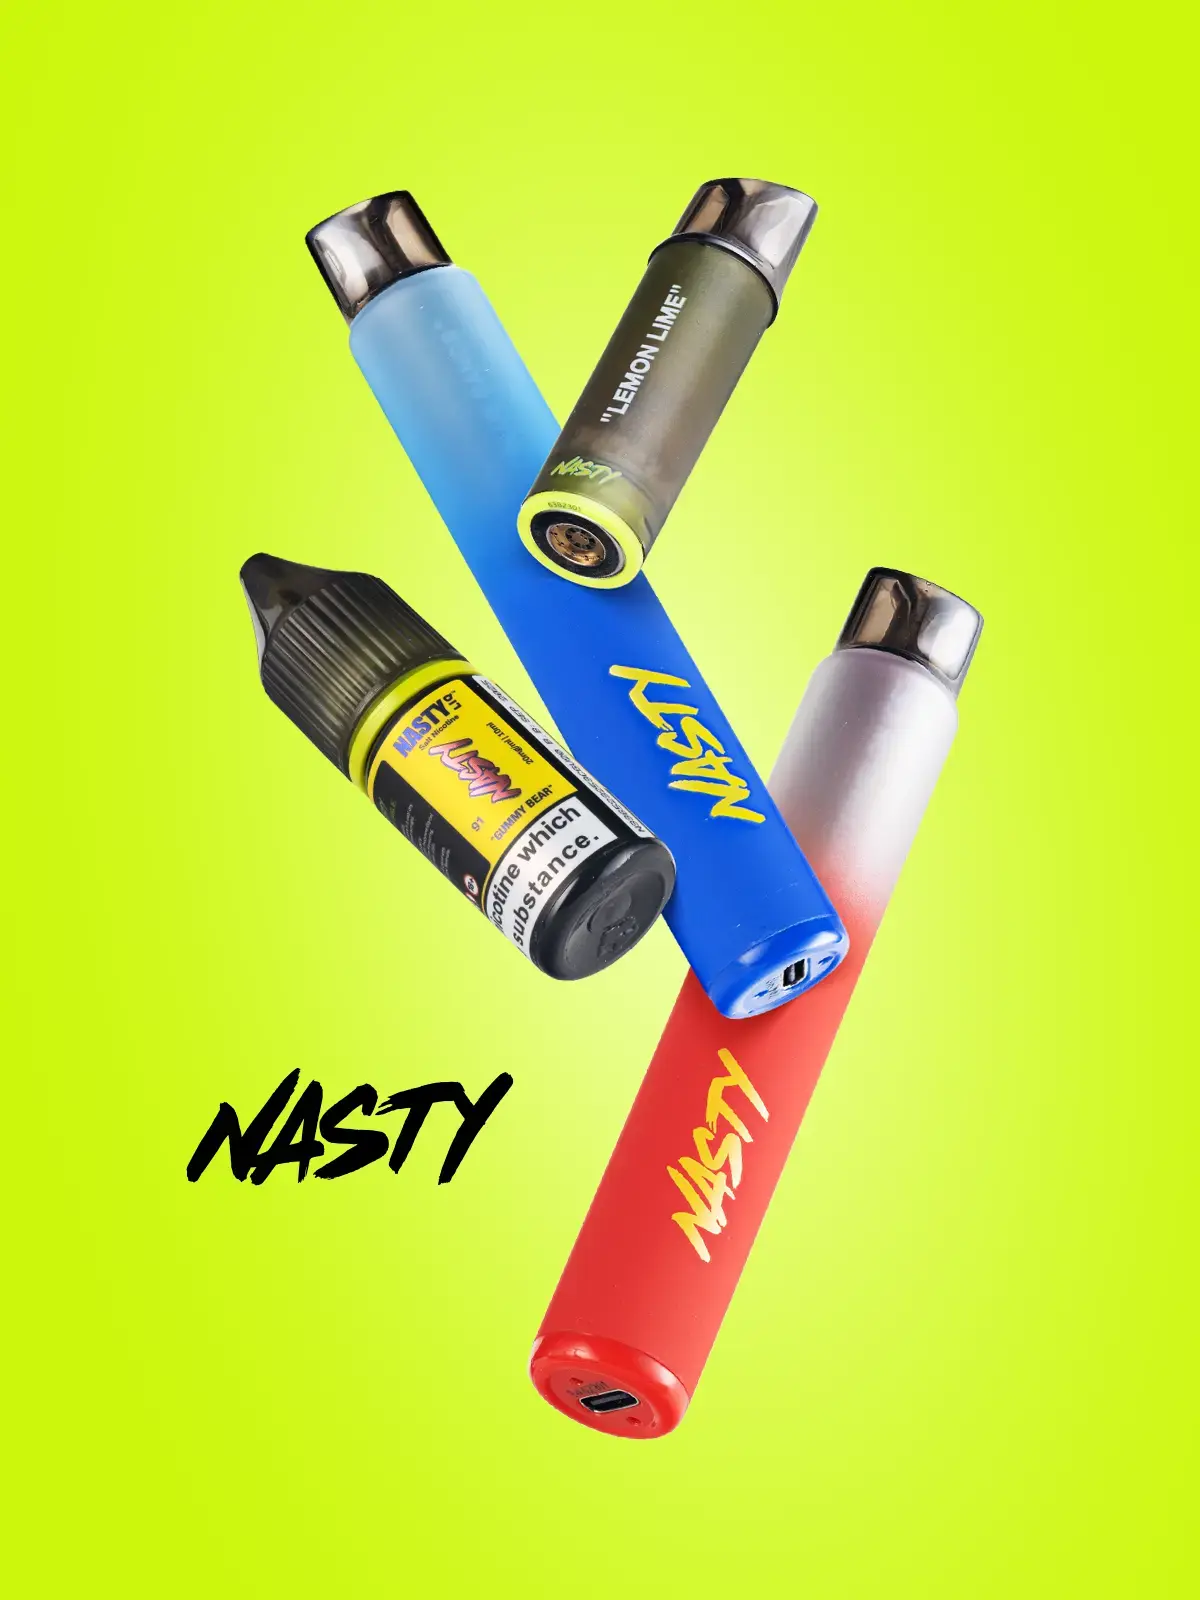 Two Nasty PX2 pod devices, one blue and one red, along with a PX2 pod in Lemon Lime flavour, and a Gummy Bear flavoured Nasty E-liquid. The image also feature the Nasty logo. Objects are floating in front of a neon green coloured background